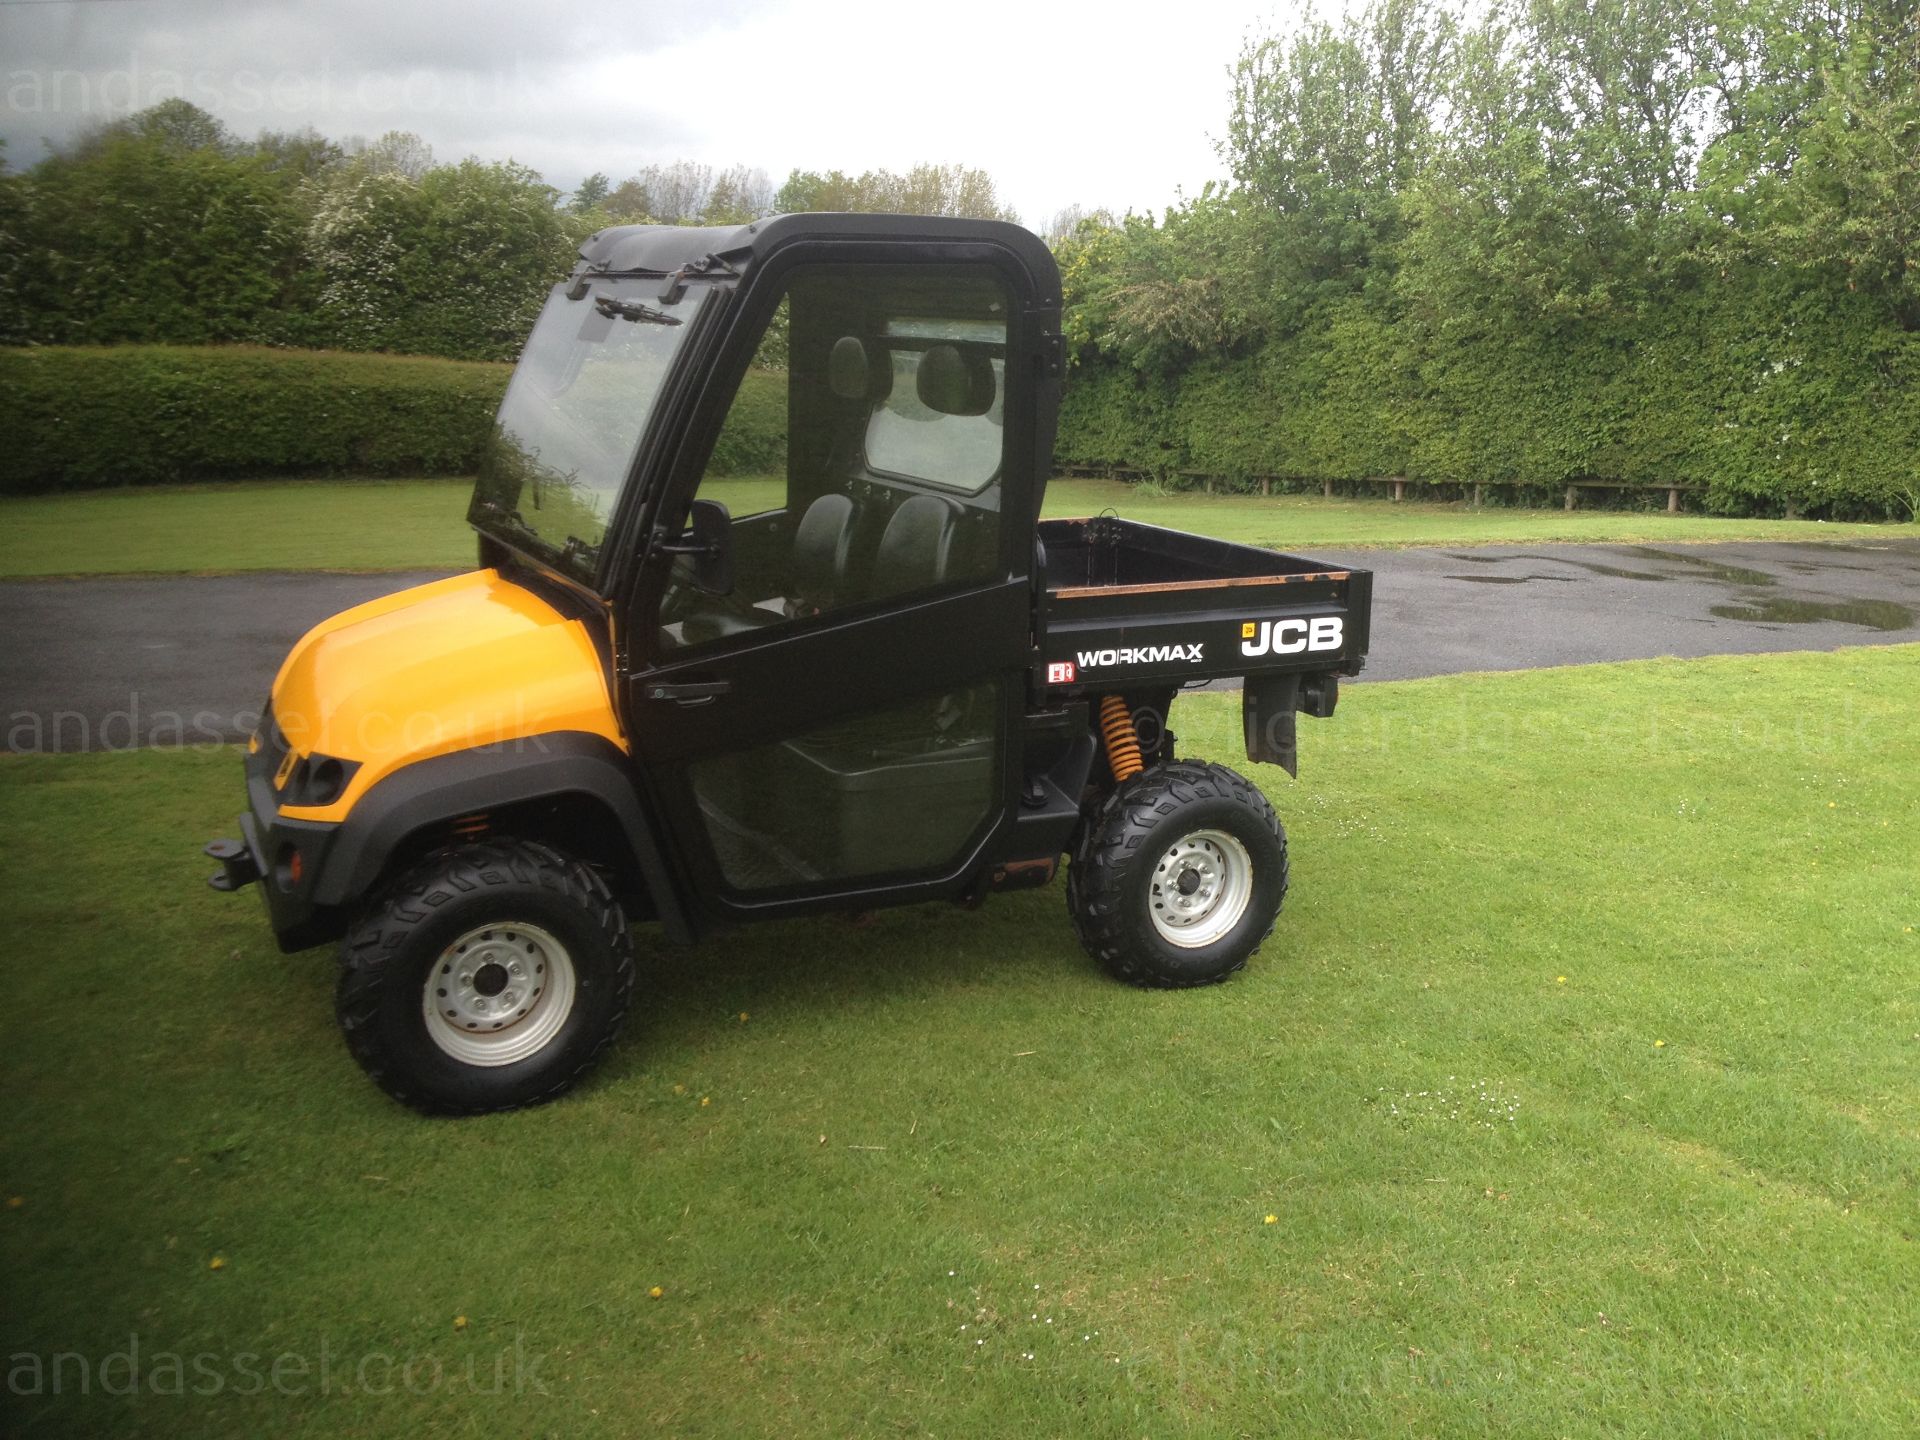 2012 JCB WORKMAX 800D UTILITY VEHICLE - Image 3 of 9